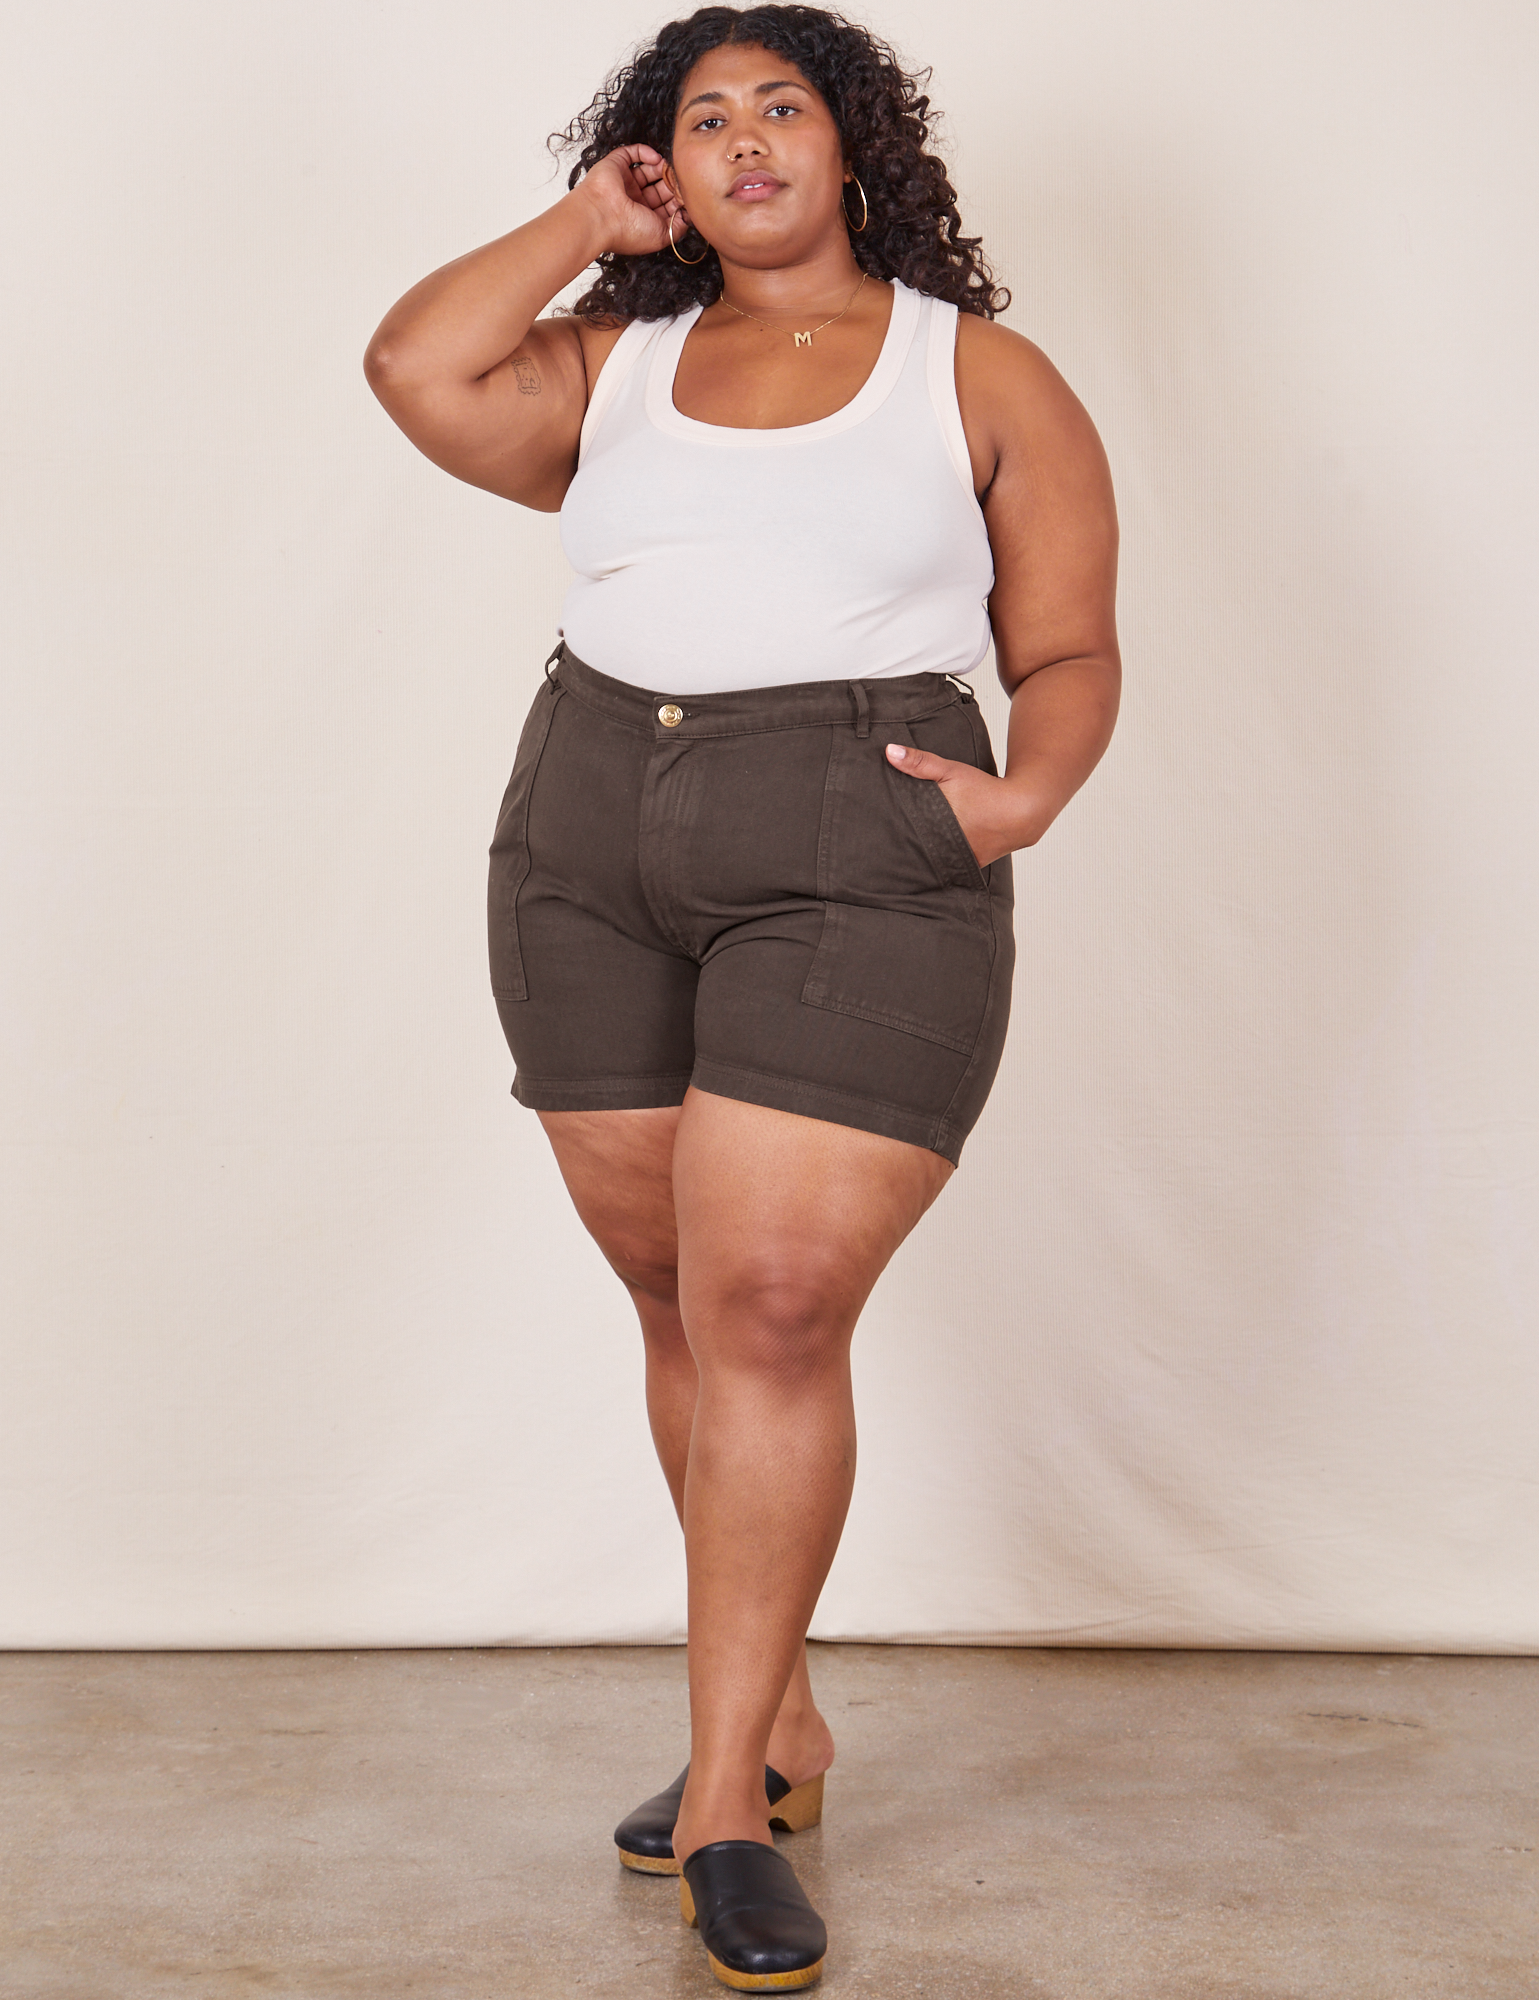 Morgan is 5’5” and wearing 1XL Classic Work Shorts in Espresso Brown paired with a Tank Top in vintage tee off-white